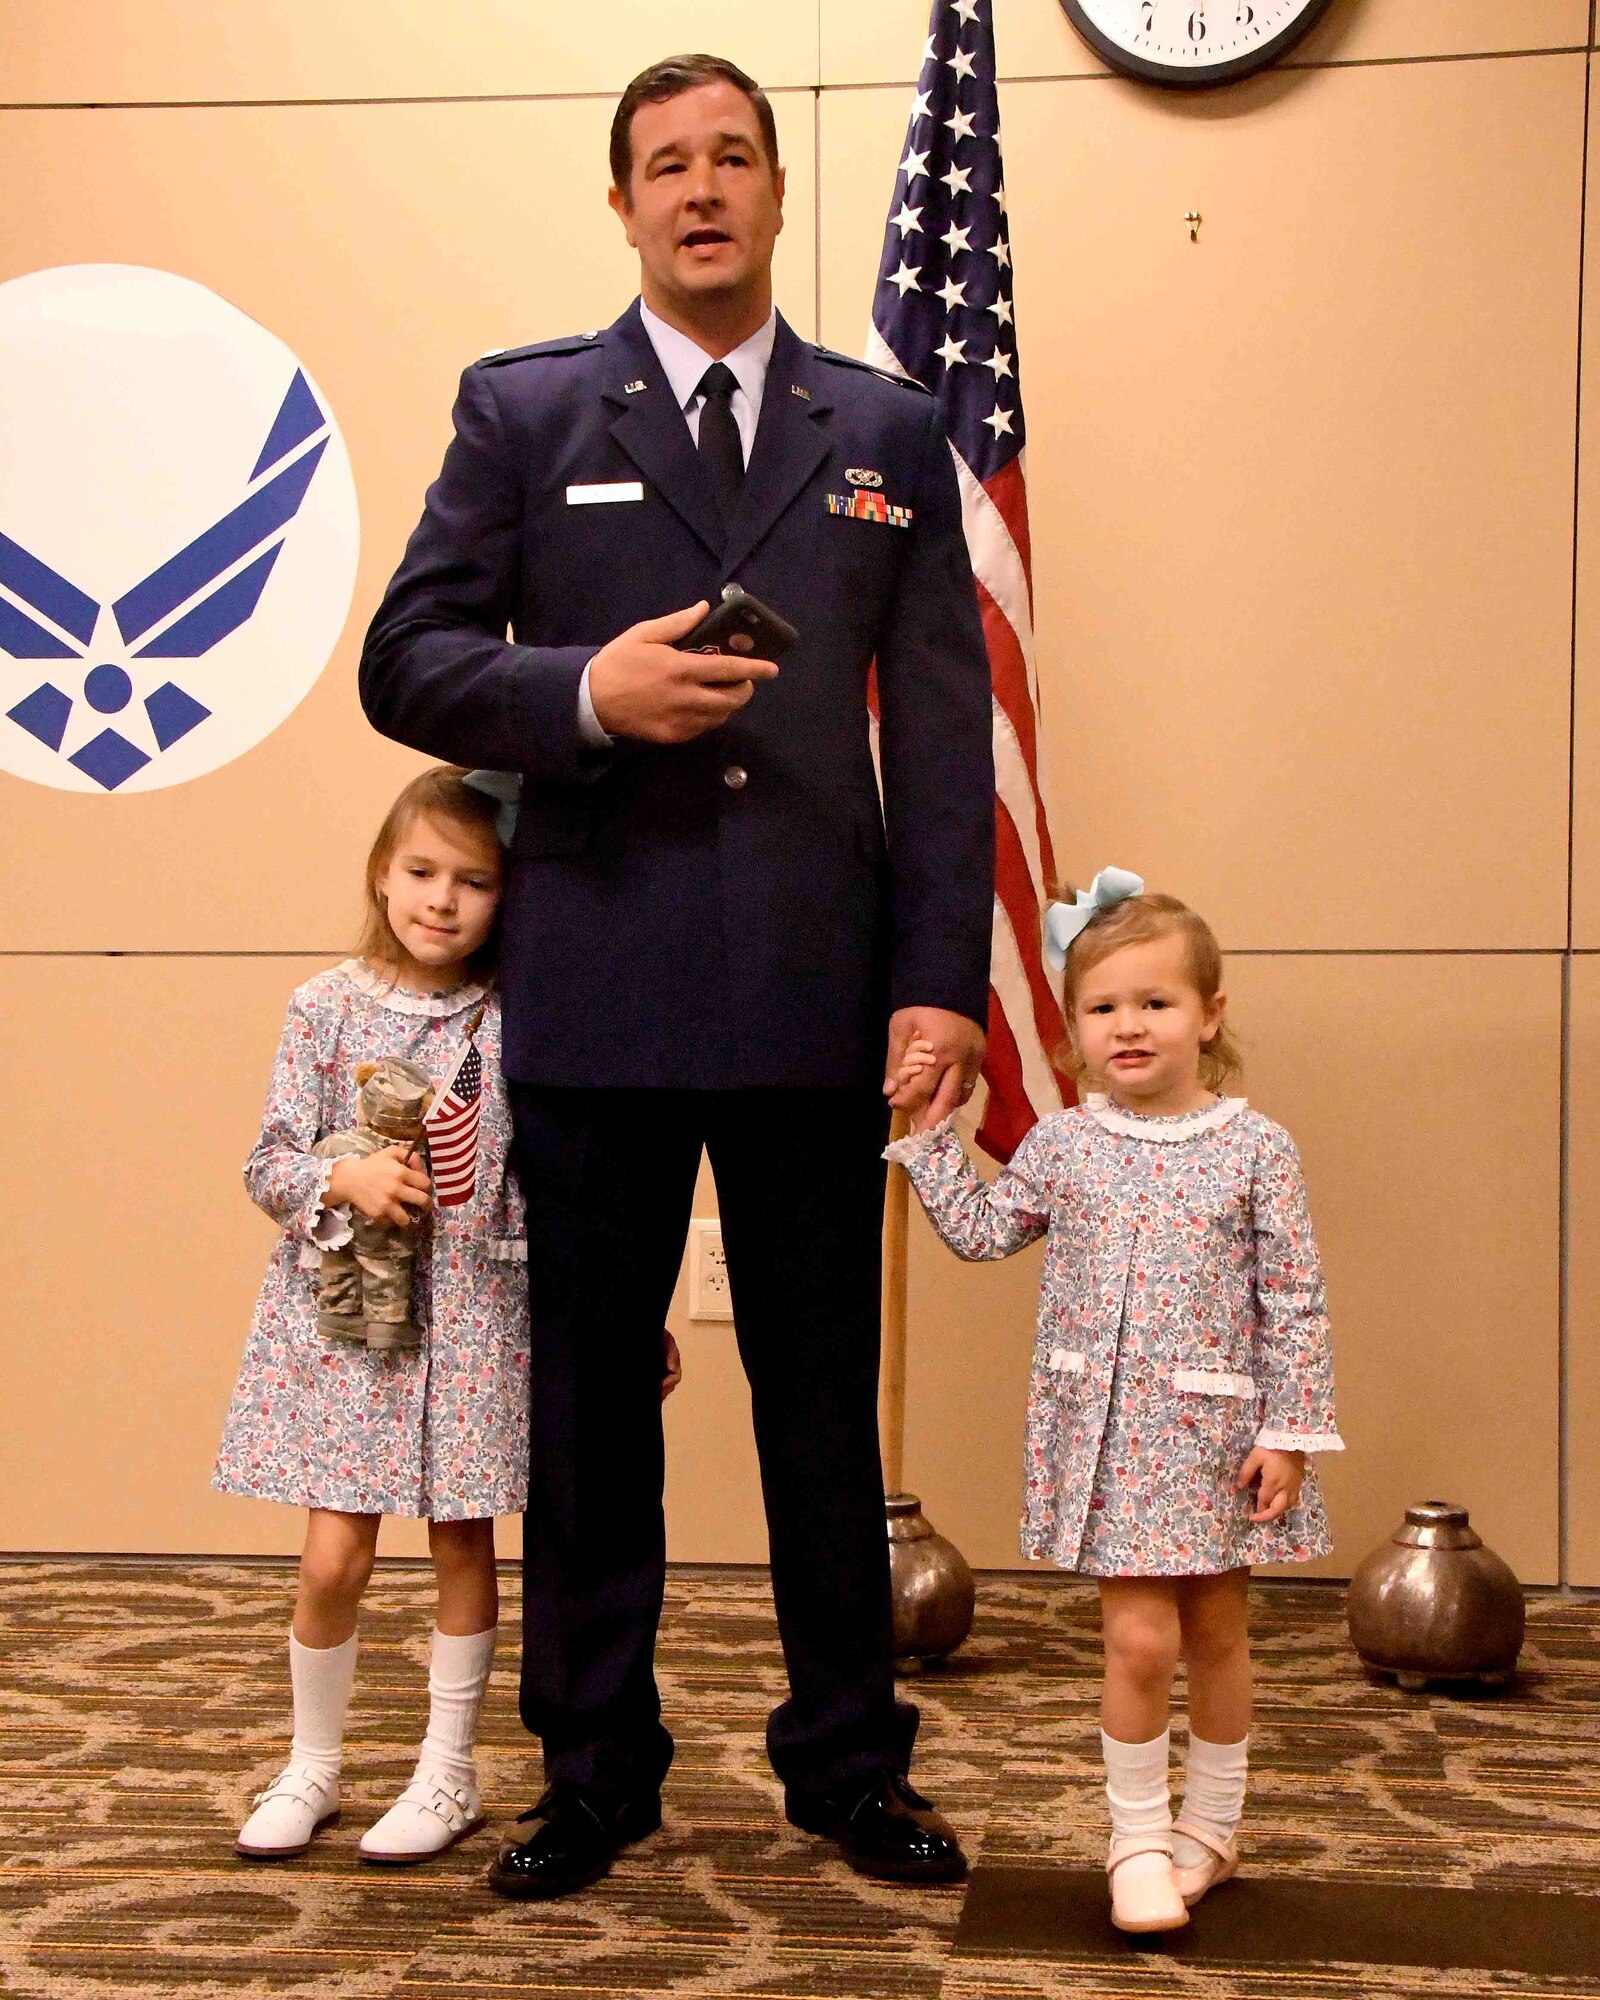 Maj. Joseph Thomas, 94th Civil Engineer Squadron commander, addresses the audience during an assumption of command ceremony at Dobbins Air Reserve Base, Georgia on Oct. 15, 2017. After officially assuming command of the squadron, his daughters Caroline and Marjorie Thomas joined him while he addressed the crowd. (U.S. Air Force photo by Staff Sgt. Jaimi L. Upthegrove)